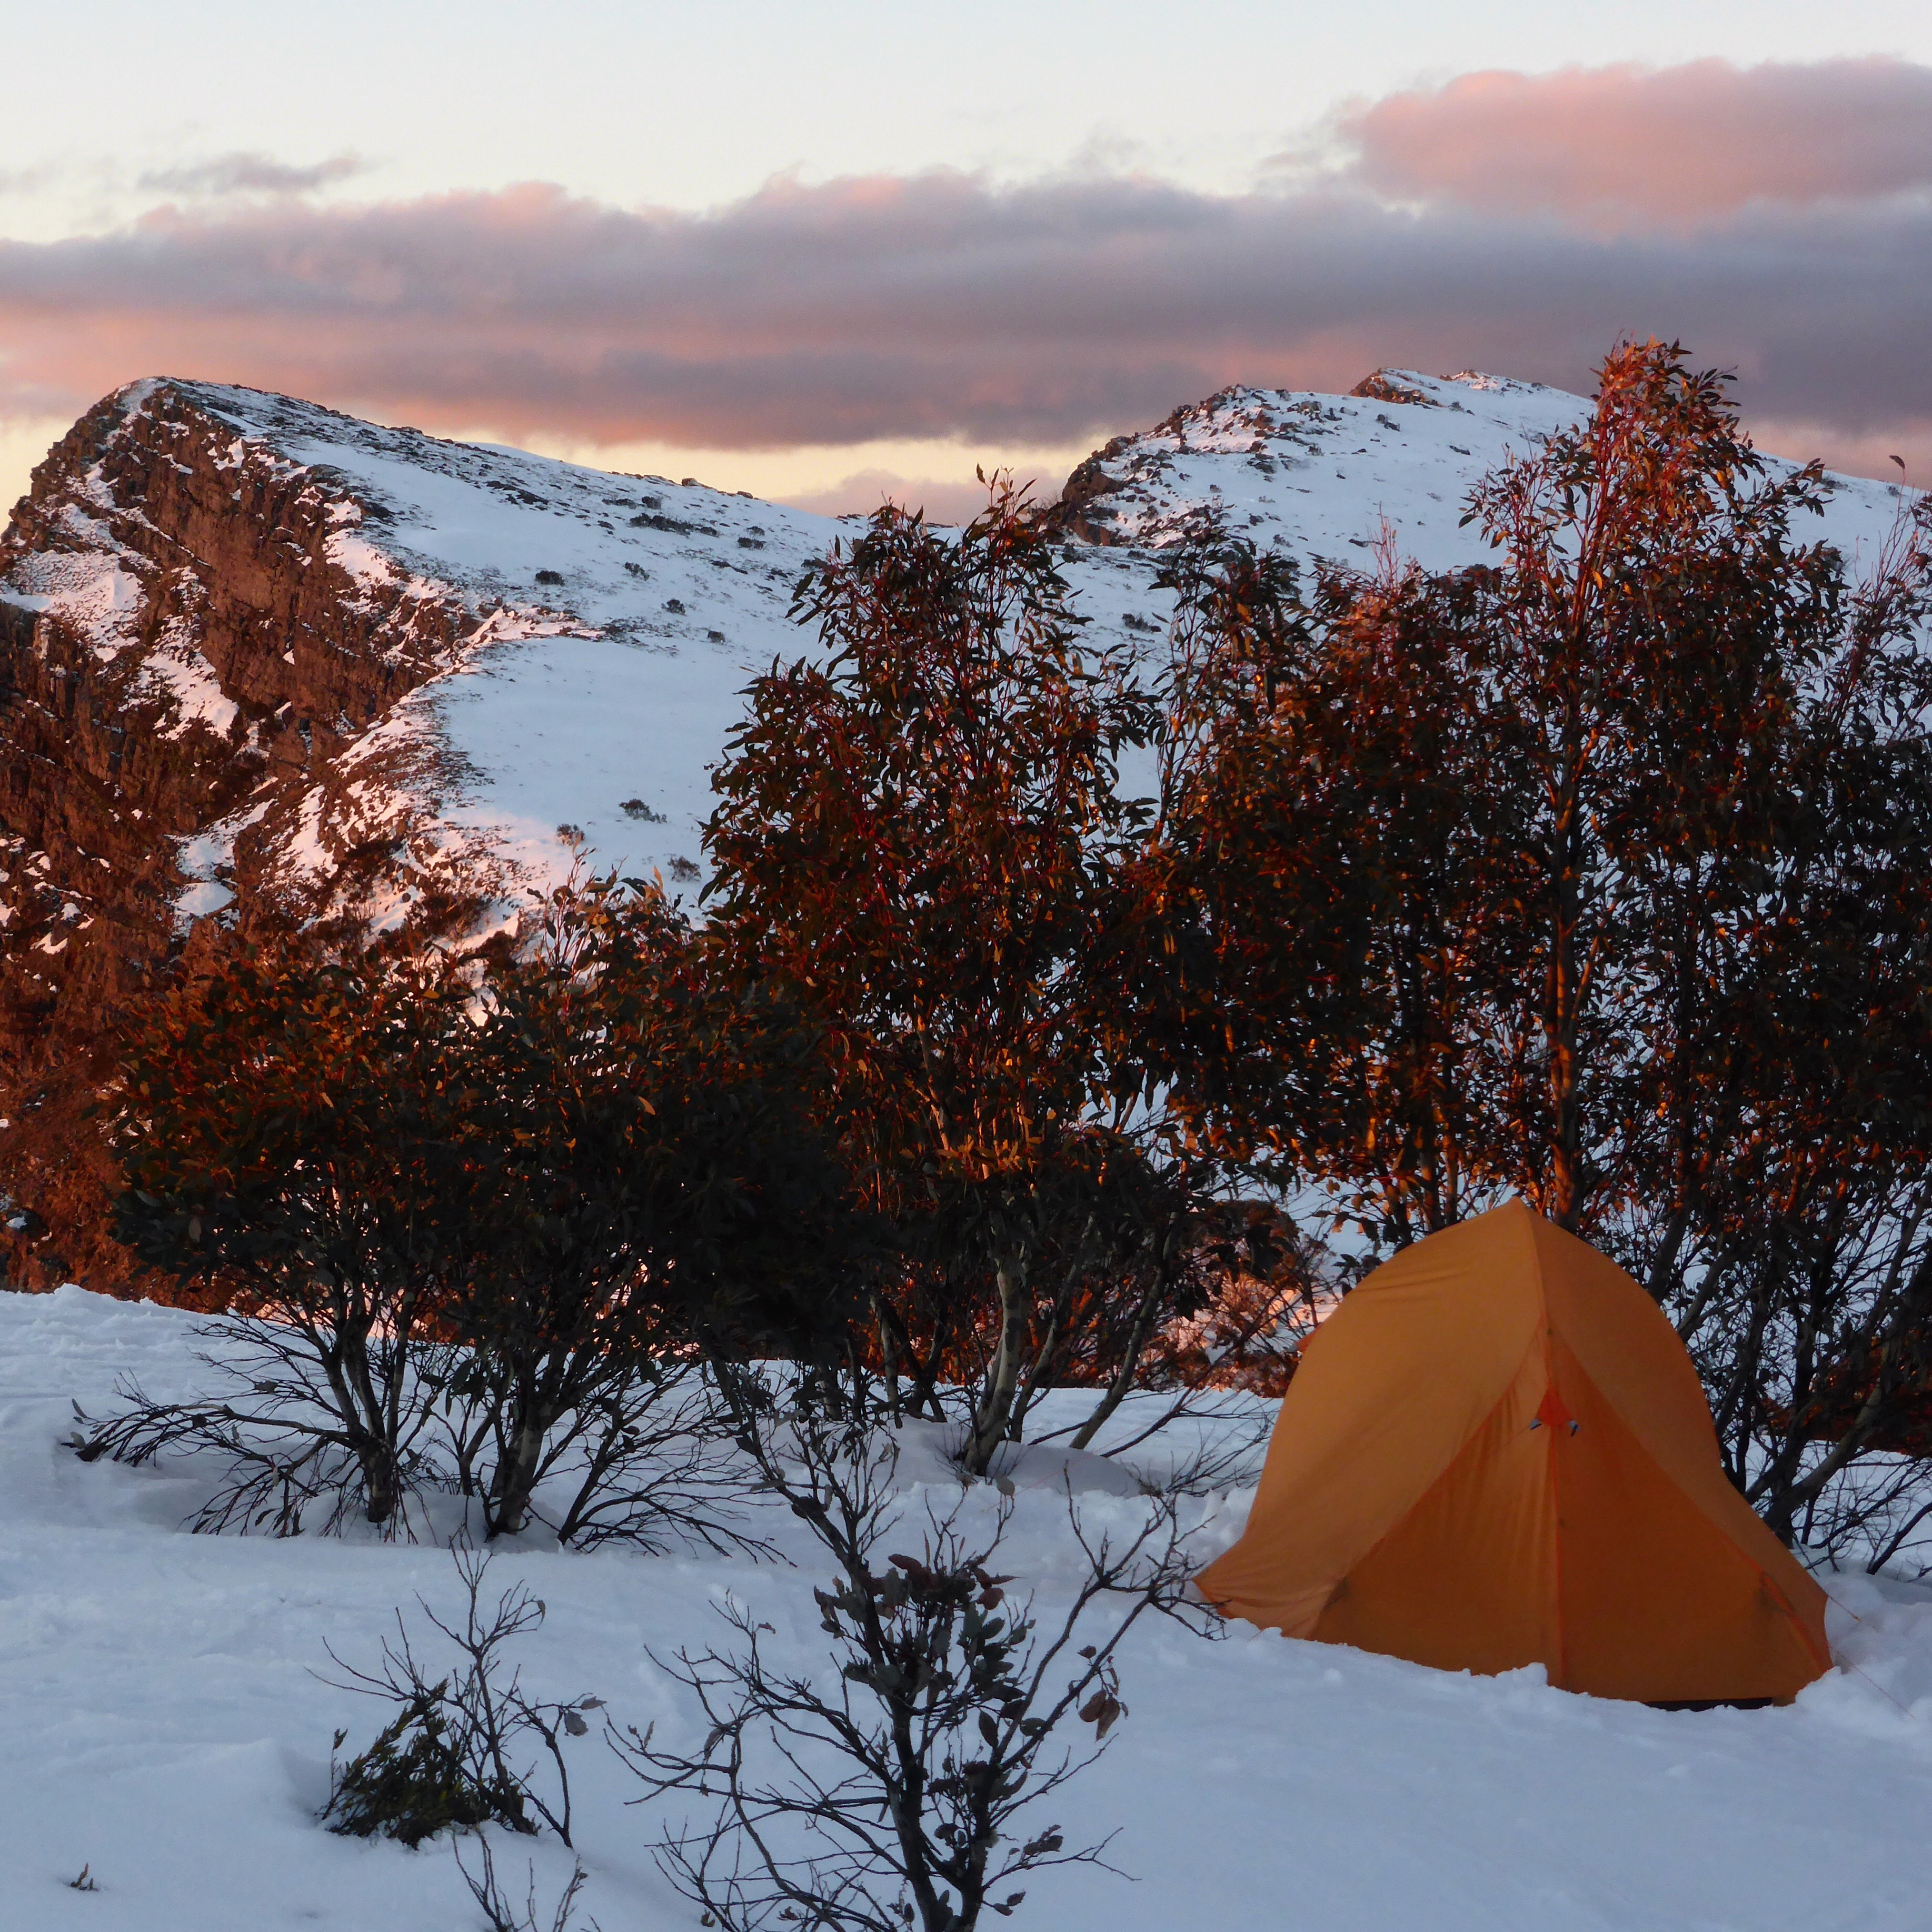 Camping in snow